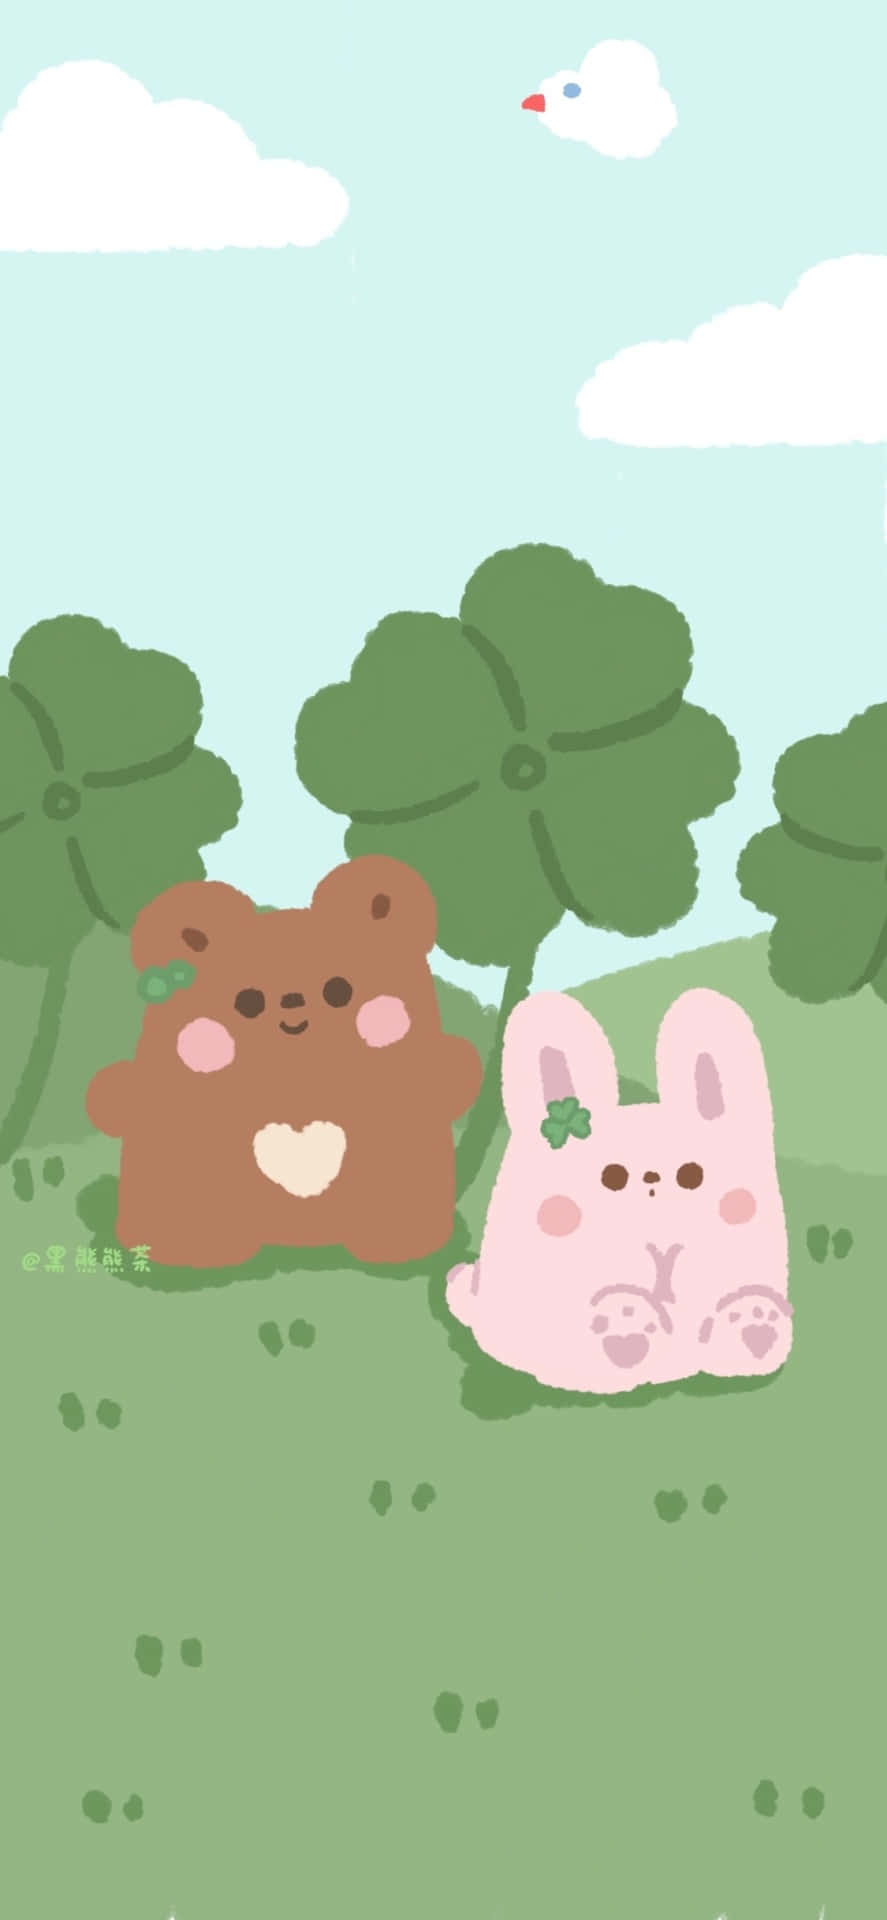 Download A Cartoon Of Two Teddy Bears In The Grass Wallpaper ...